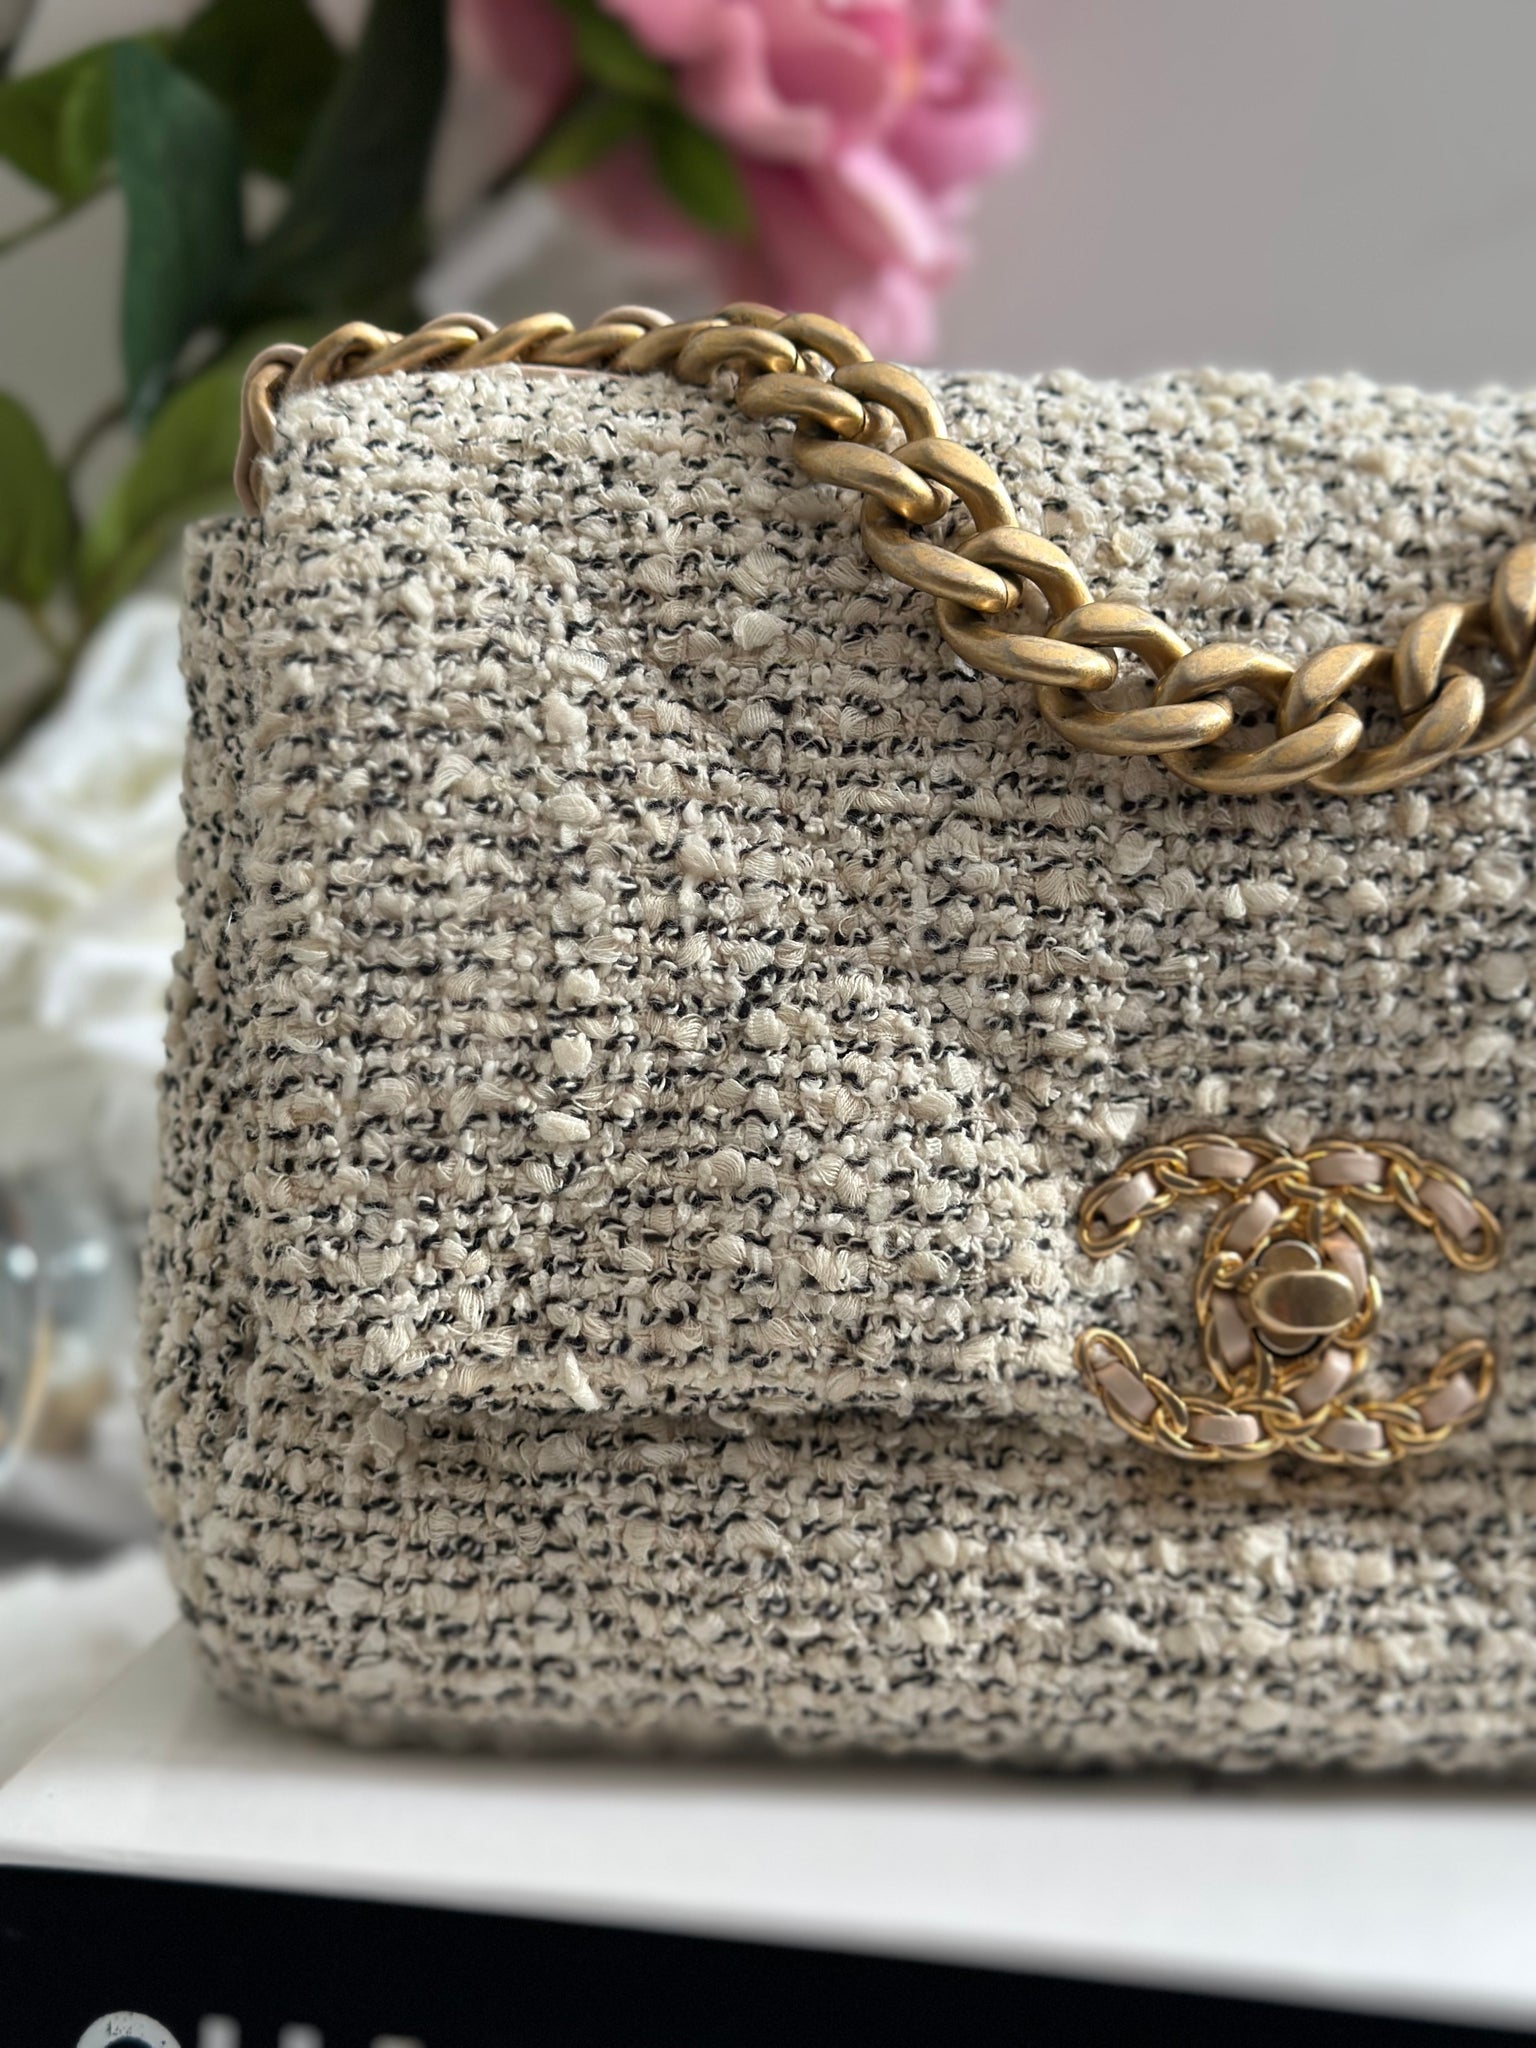 Chanel 19 Oreo Beige Tweed size Small Flap Bag from 21S Collection